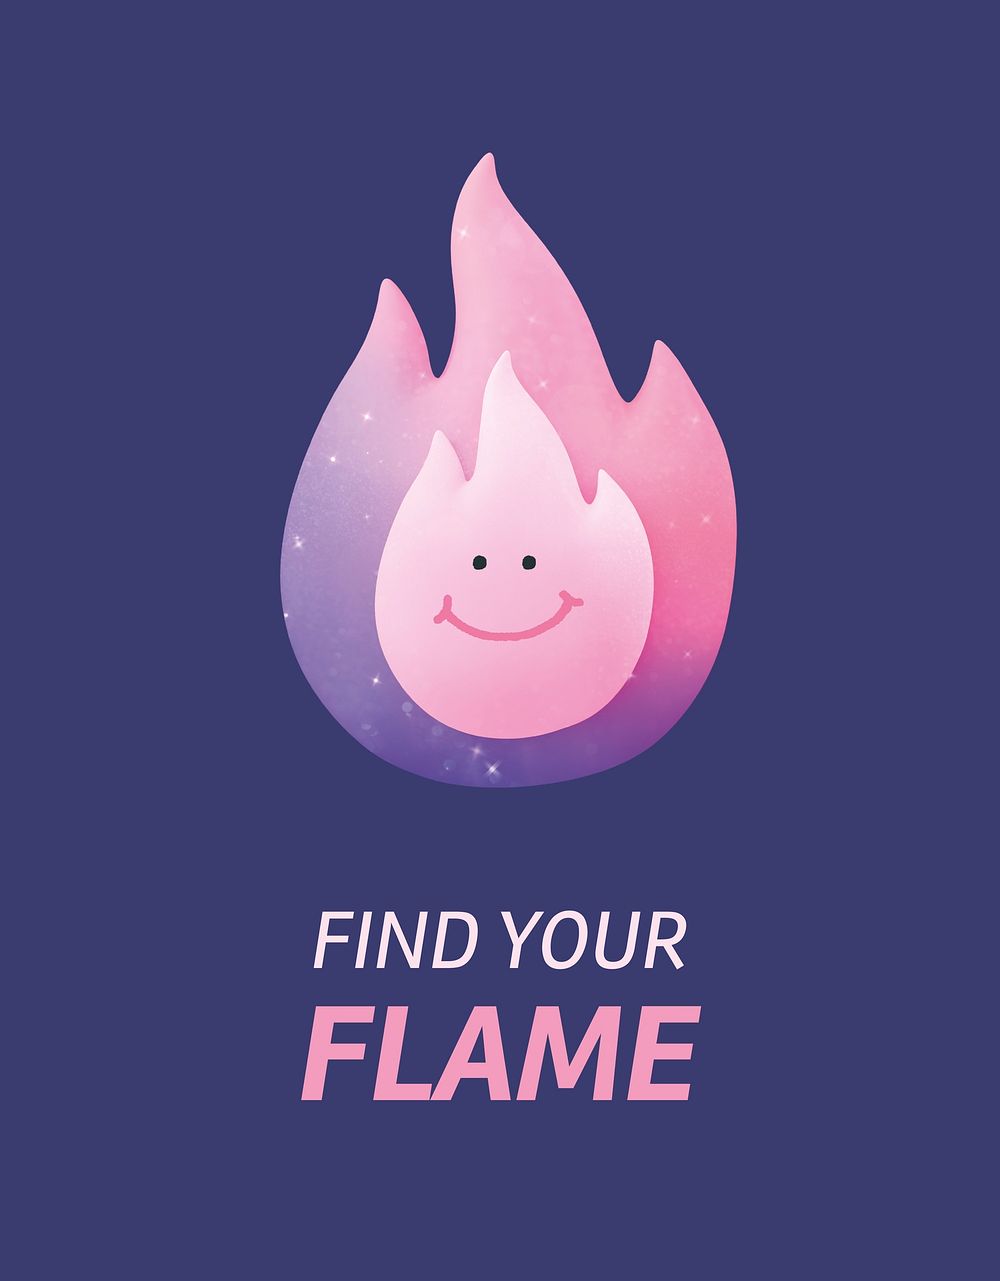 Find your flame flyer template, cute 3D illustration psd